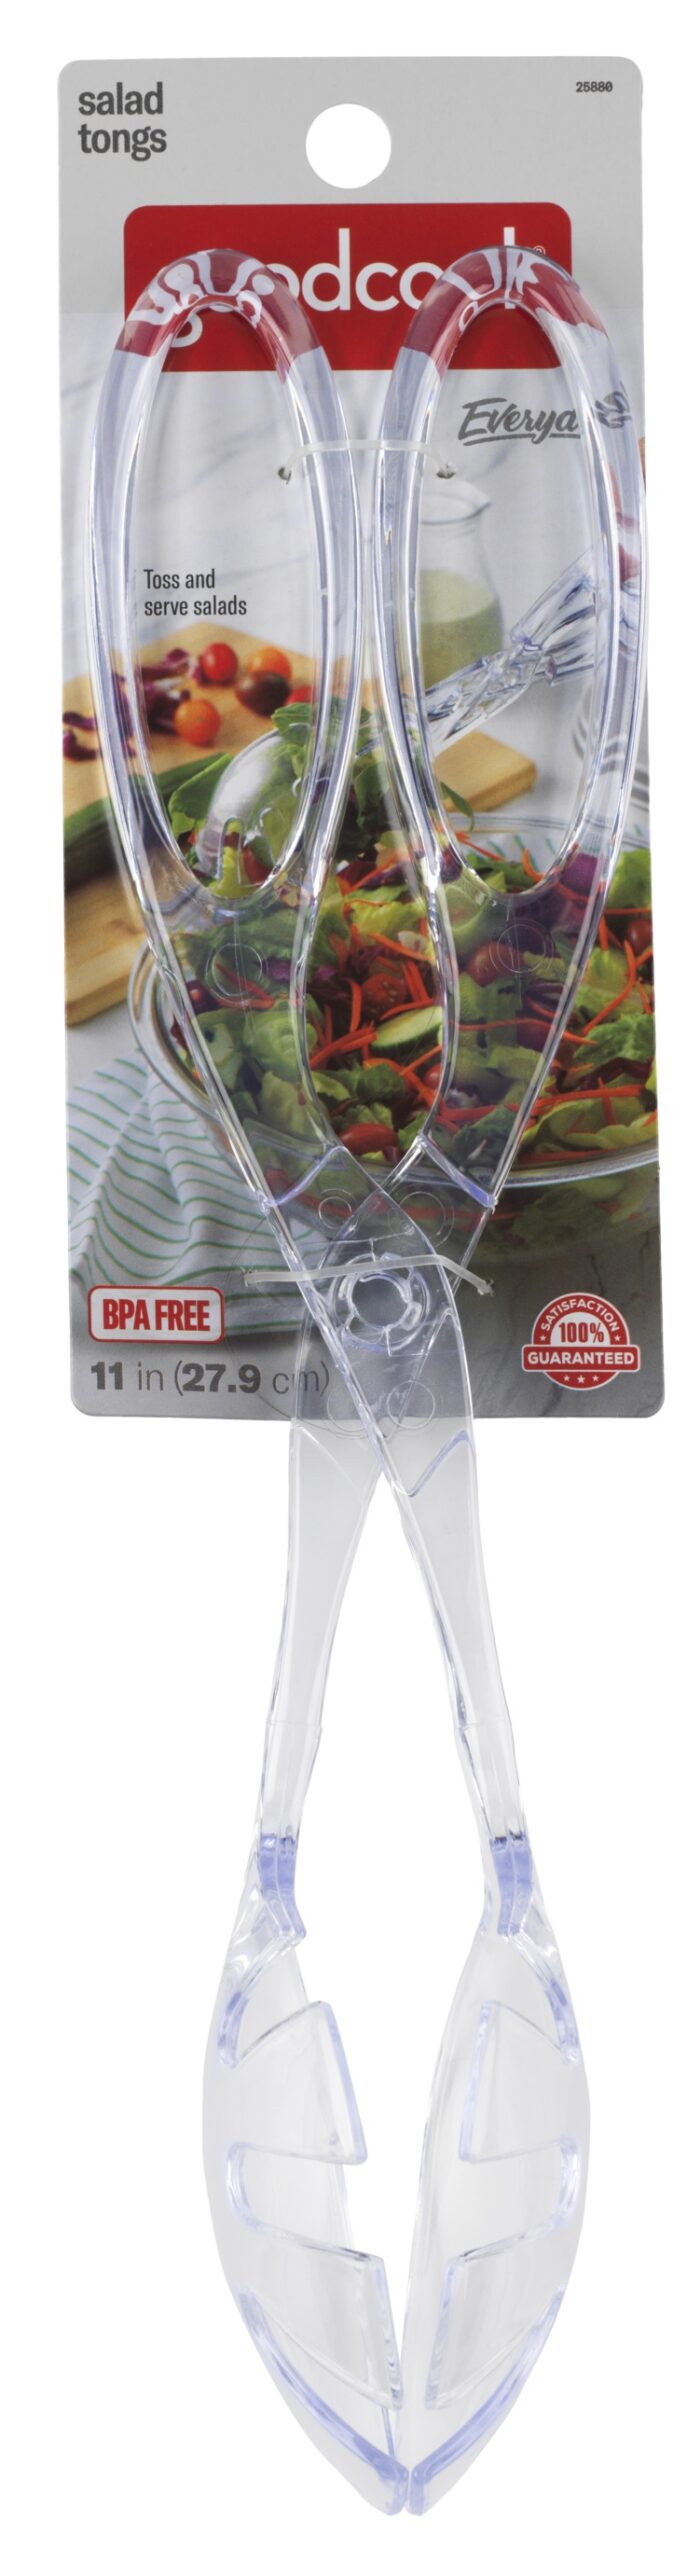 25880_GoodCook_Everyday Salad Tongs_Packaging 1.psd